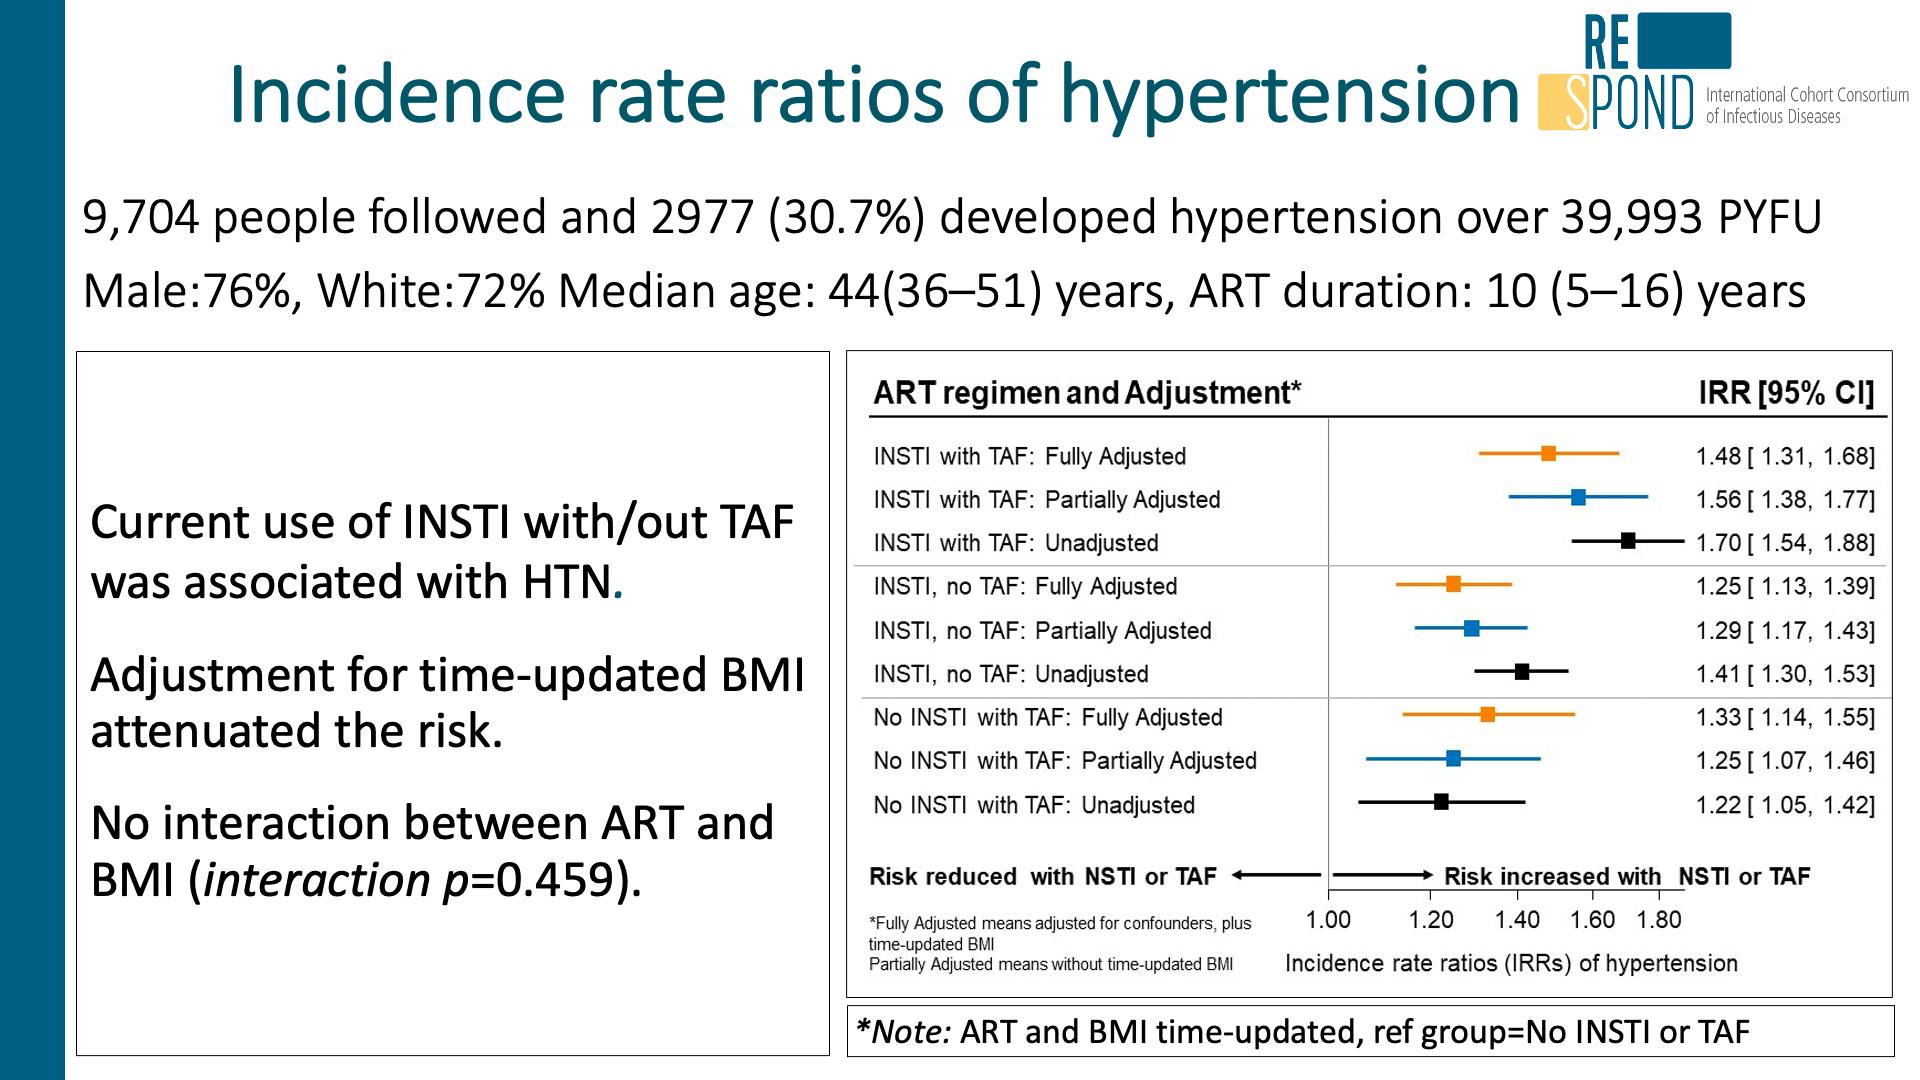 Incidence rate ratios of hypertension